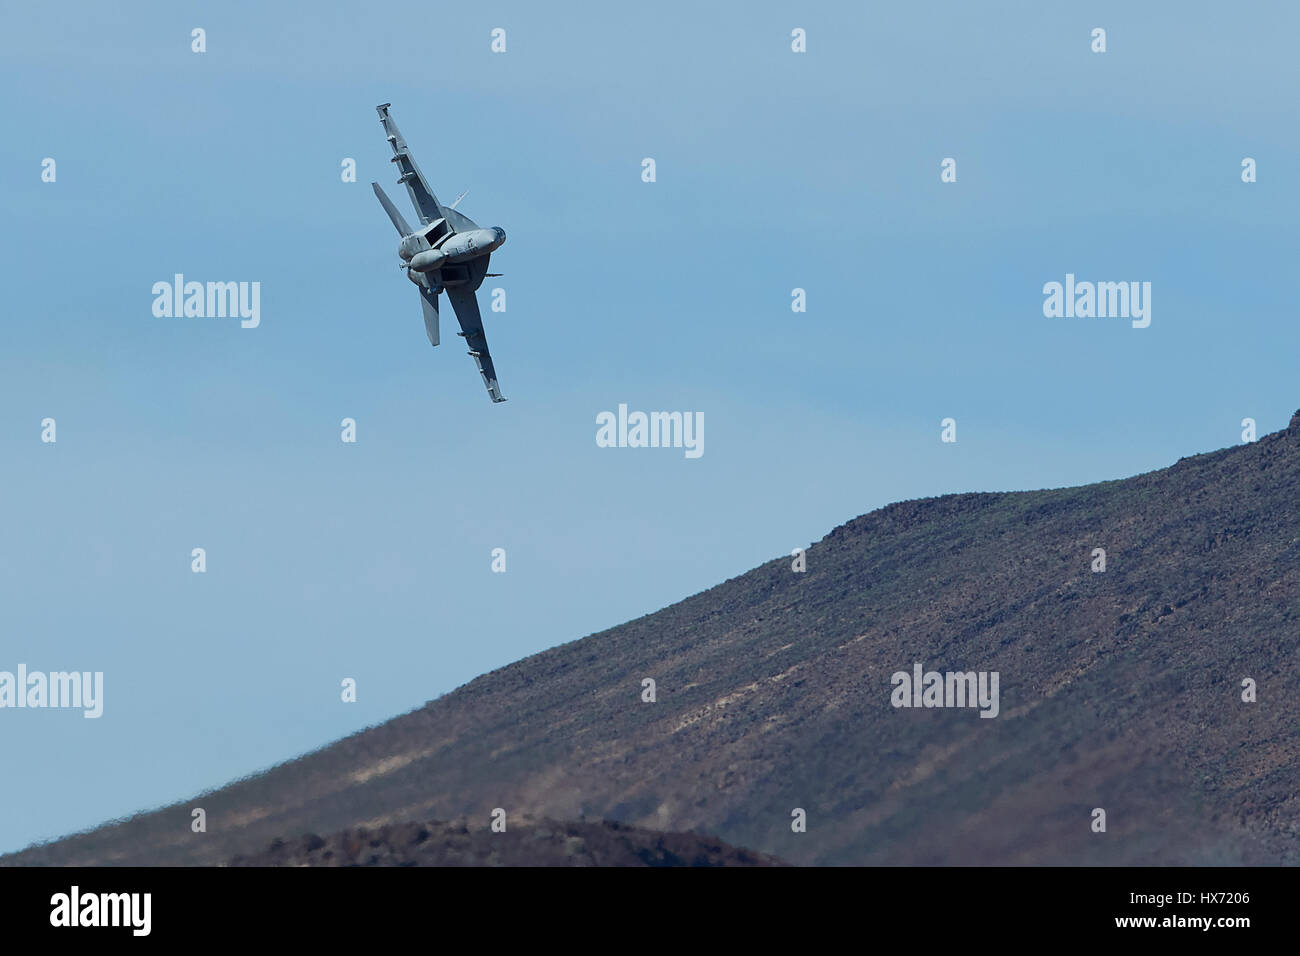 United States Navy F/A-18F Super Hornet Flying At Low Level Through A Desert Canyon. Stock Photo